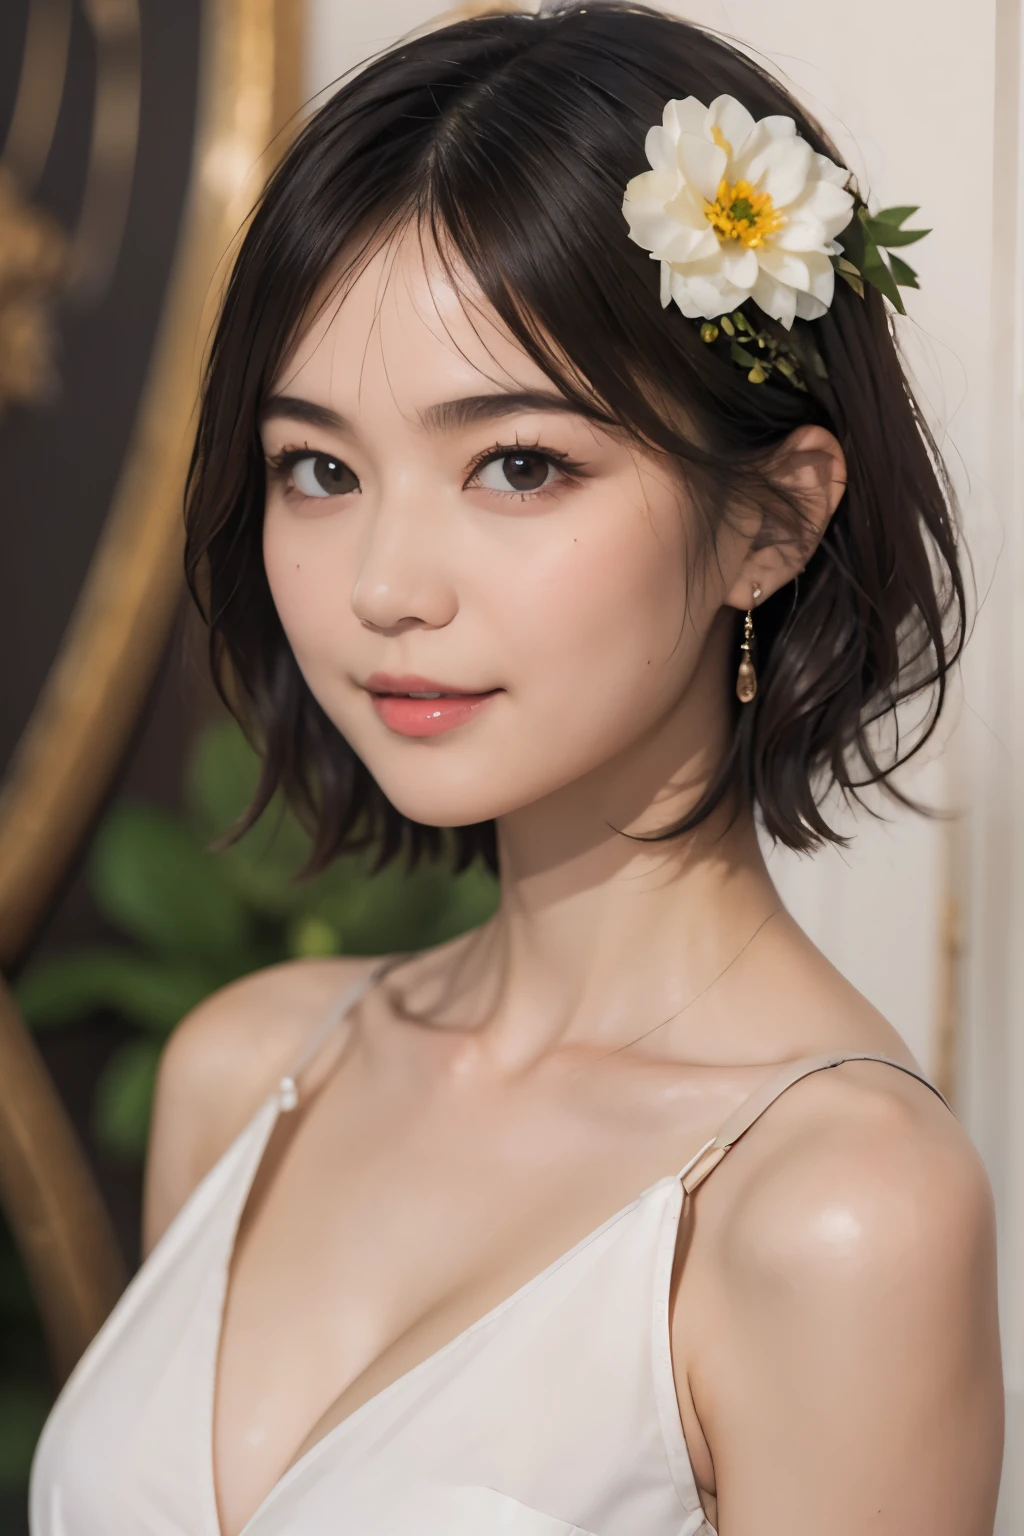 146
(20 year old woman,animal character costumes), (surreal), (High resolution), ((beautiful hairstyle 46)), ((short hair:1.46)), (gentle smile), (breasted:1.1), (lipstick)
